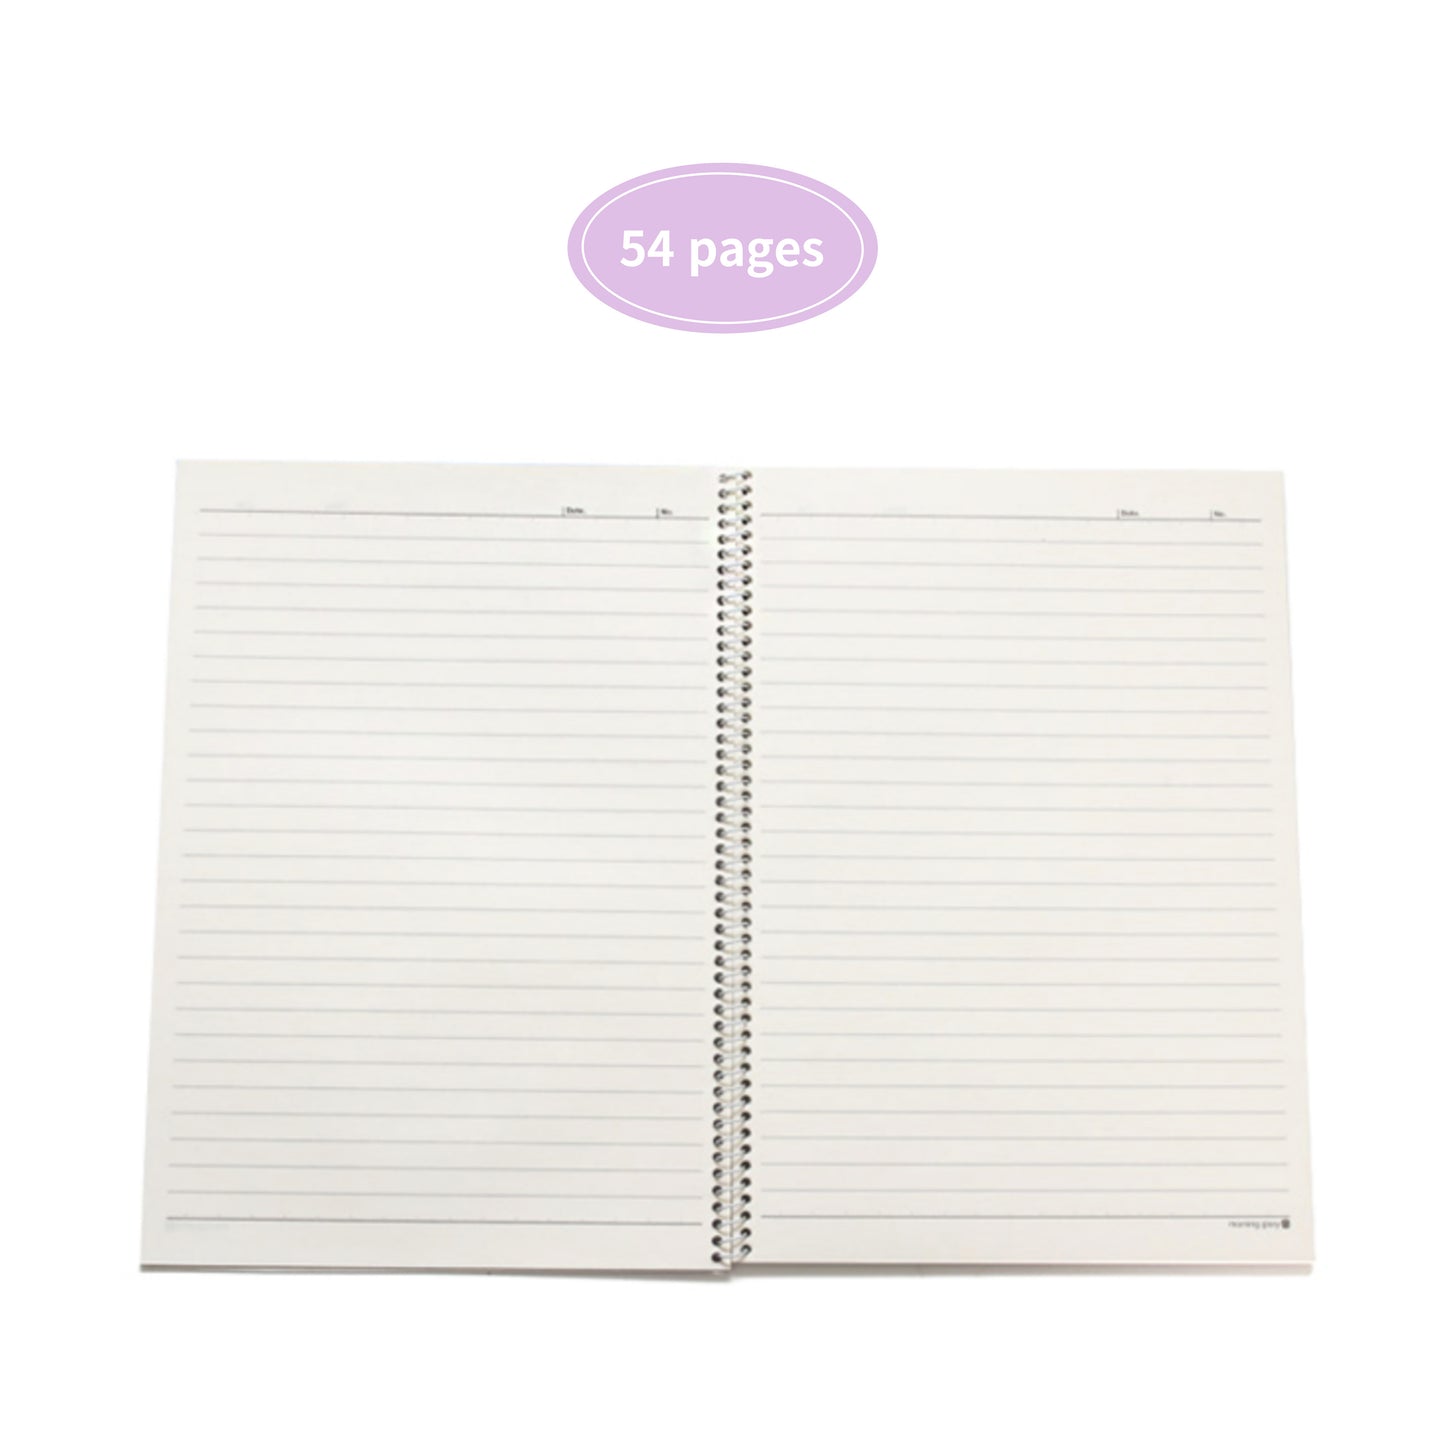 aesthetic Korean spiral notebook it's a date set 54 pages each